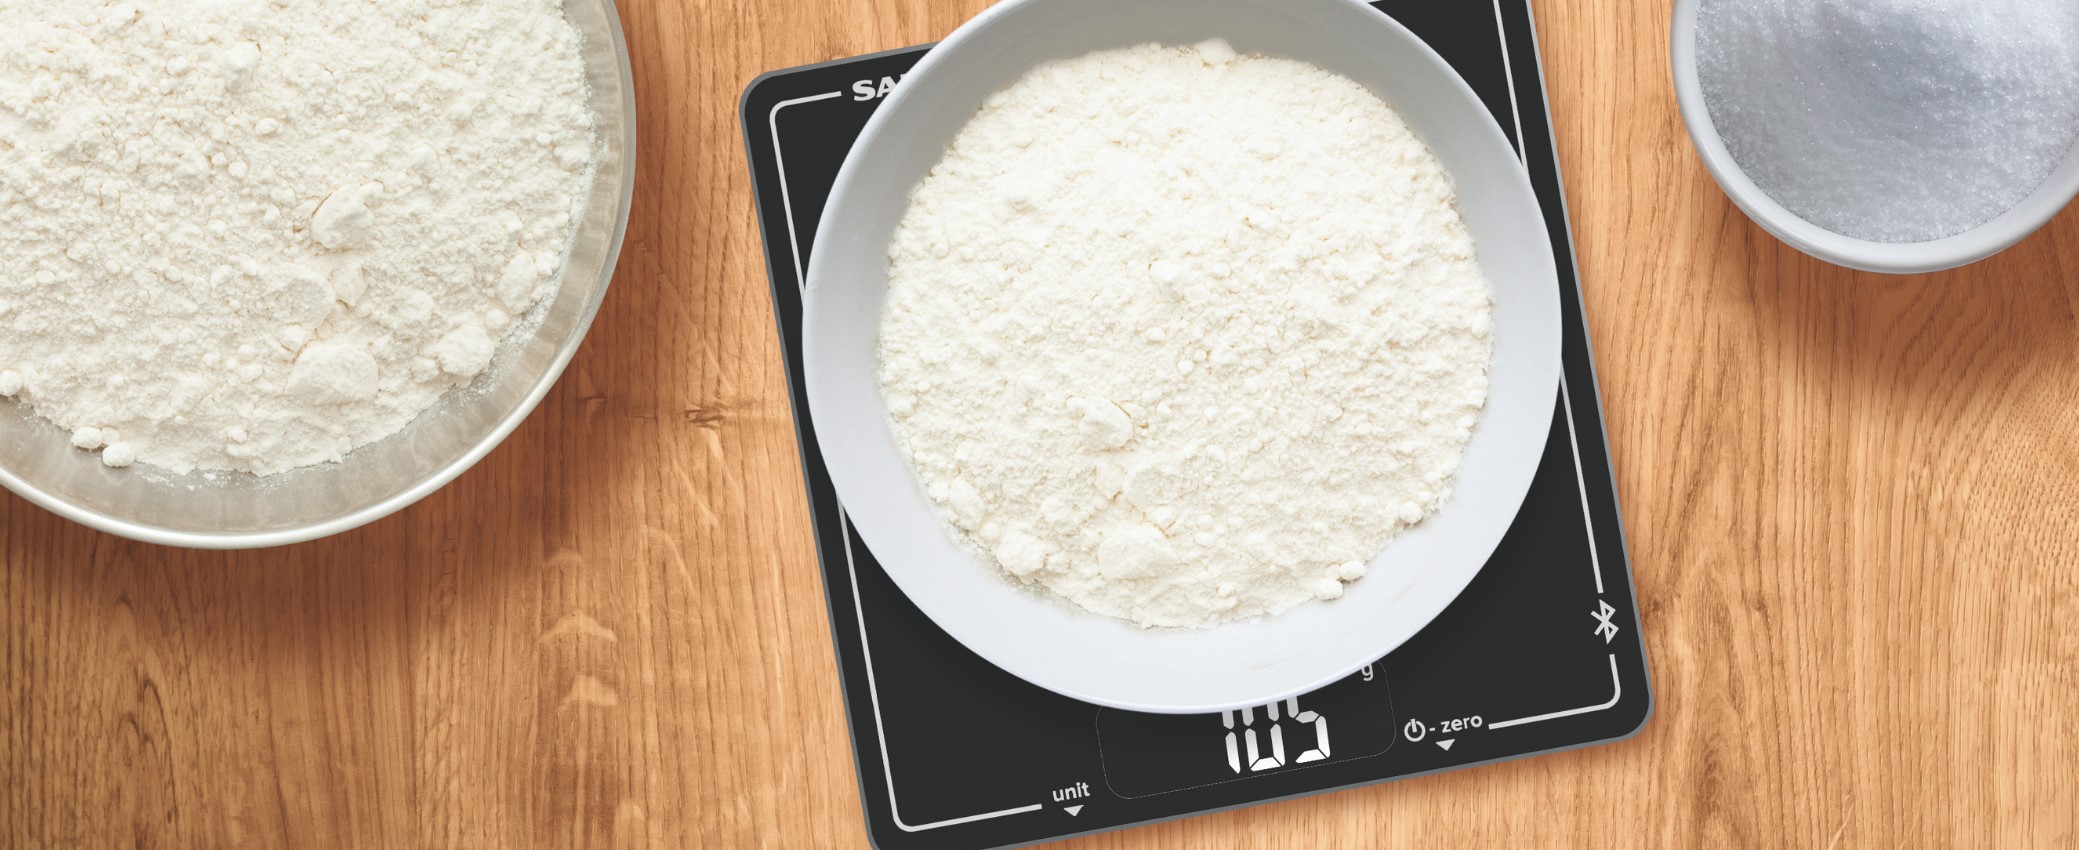 The Foolproof Trick To Make Sure Your Kitchen Scale Is Properly